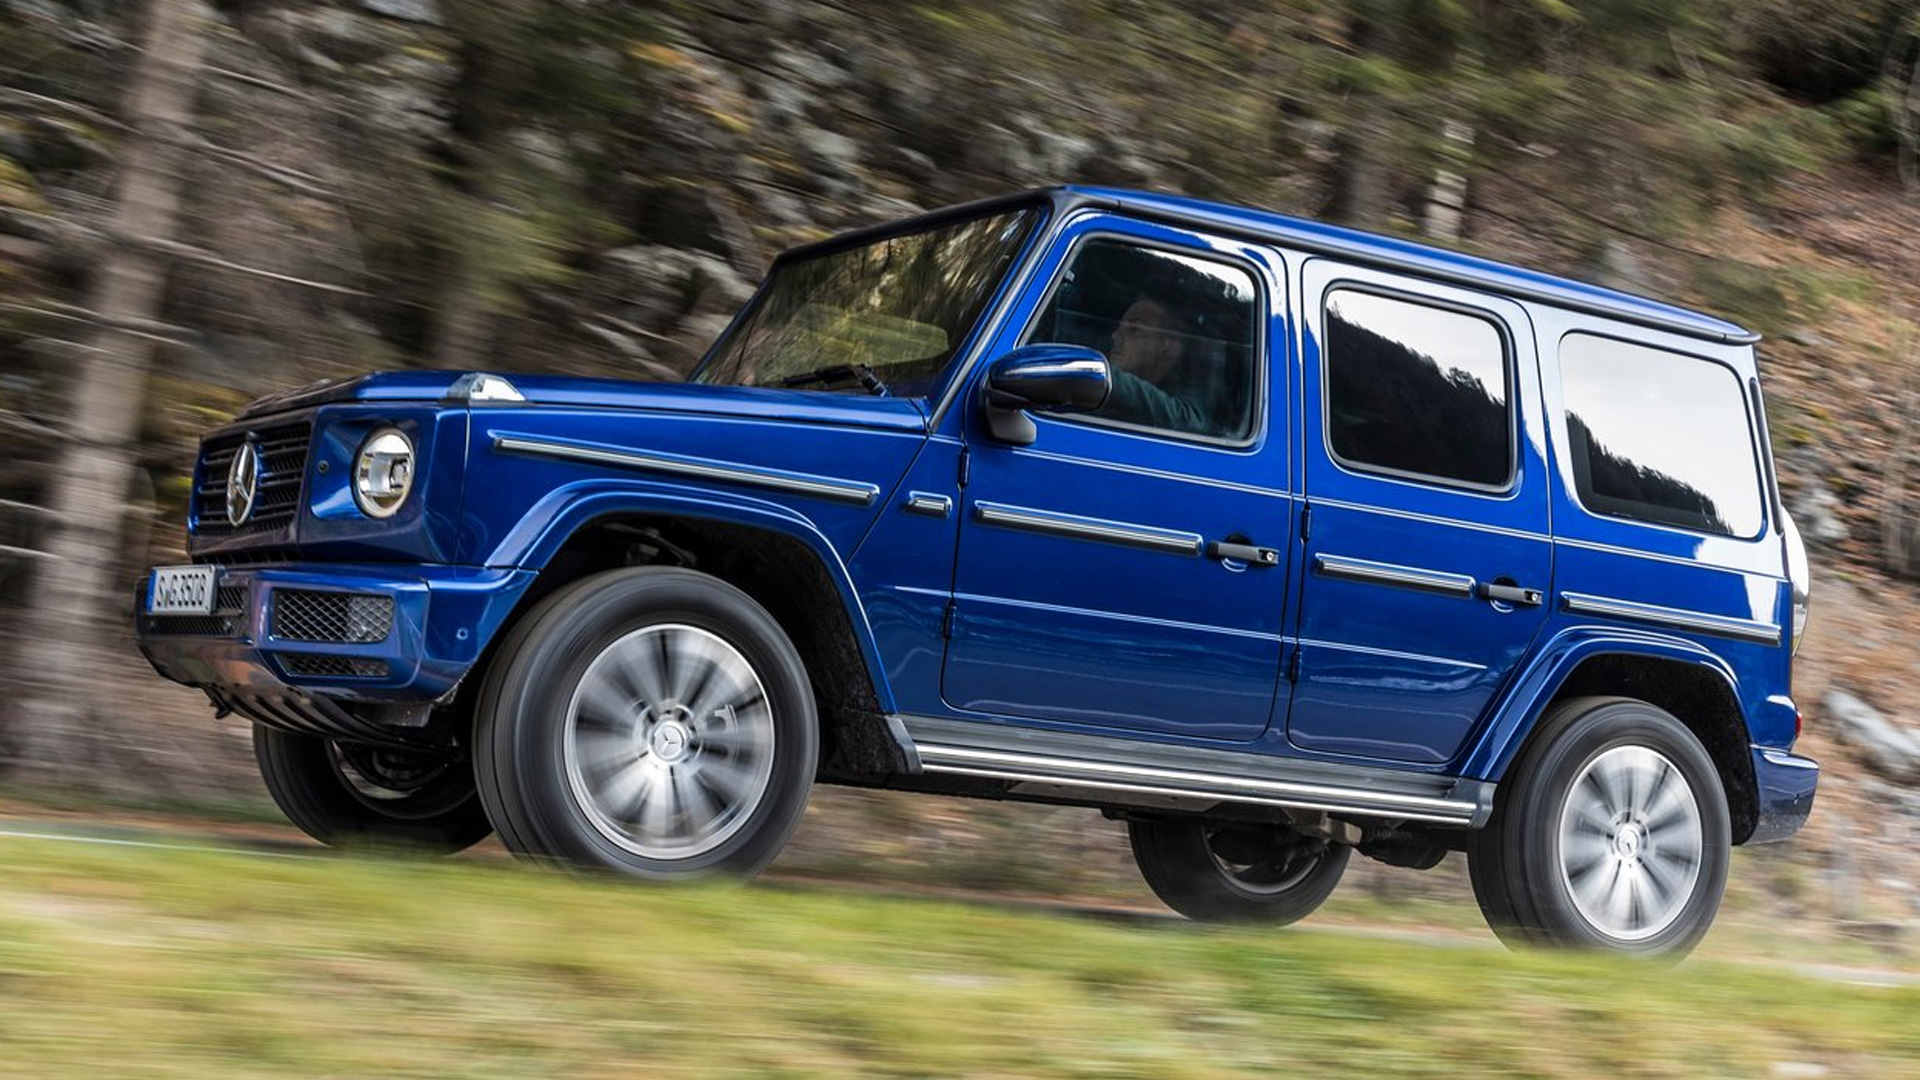 Mercedes Benz G Class 19 Price Mileage Reviews Specification Gallery Overdrive